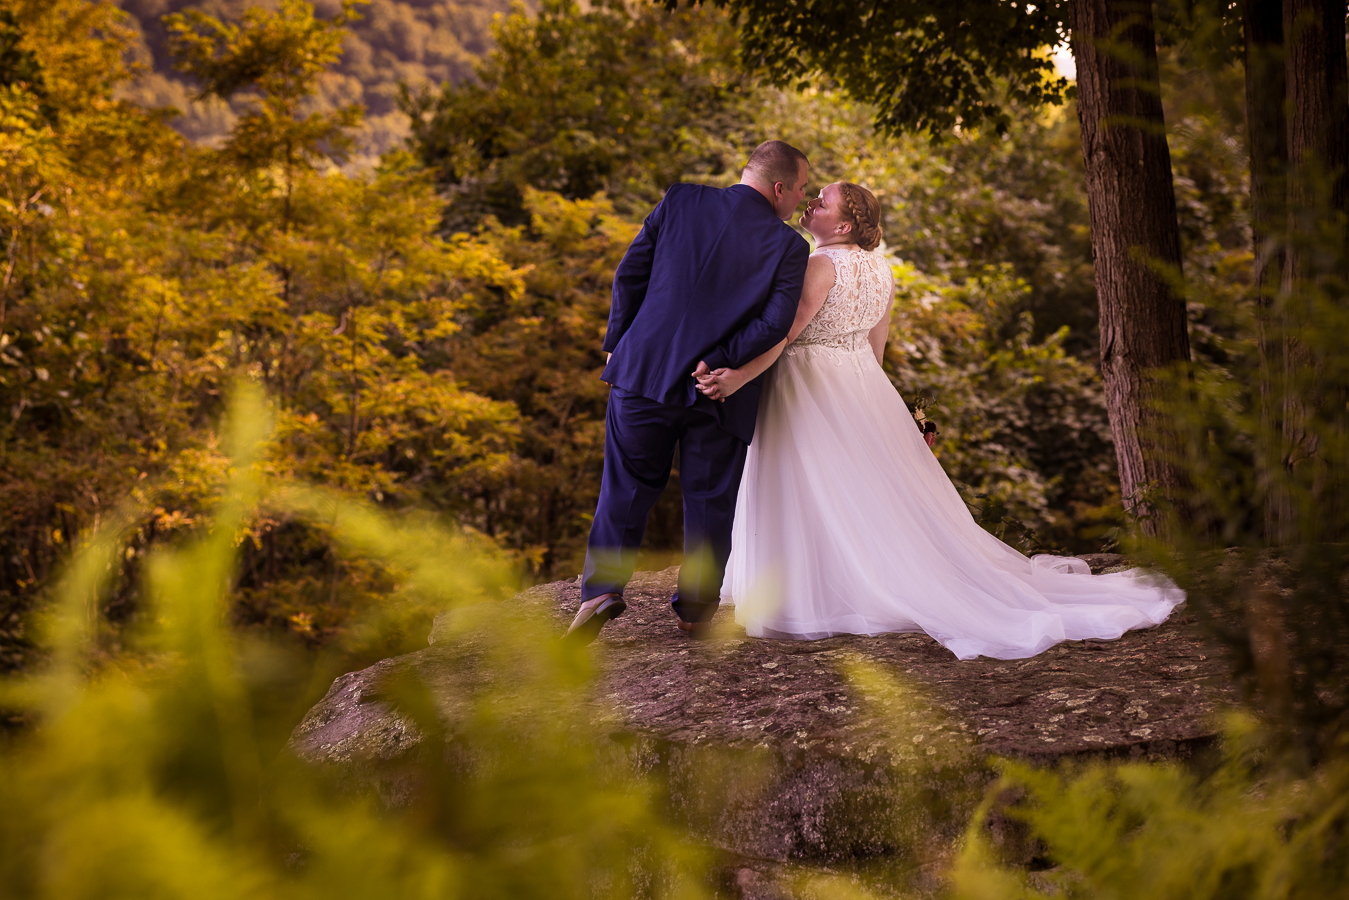 Oak Lodge Wedding Photographer, rhinehart photography, captures this colorful fall image of the bride and groom as they share a kiss on this outdoor overlook surrounded by autumn colored leaves and trees during their outdoor stahlstown, pa wedding